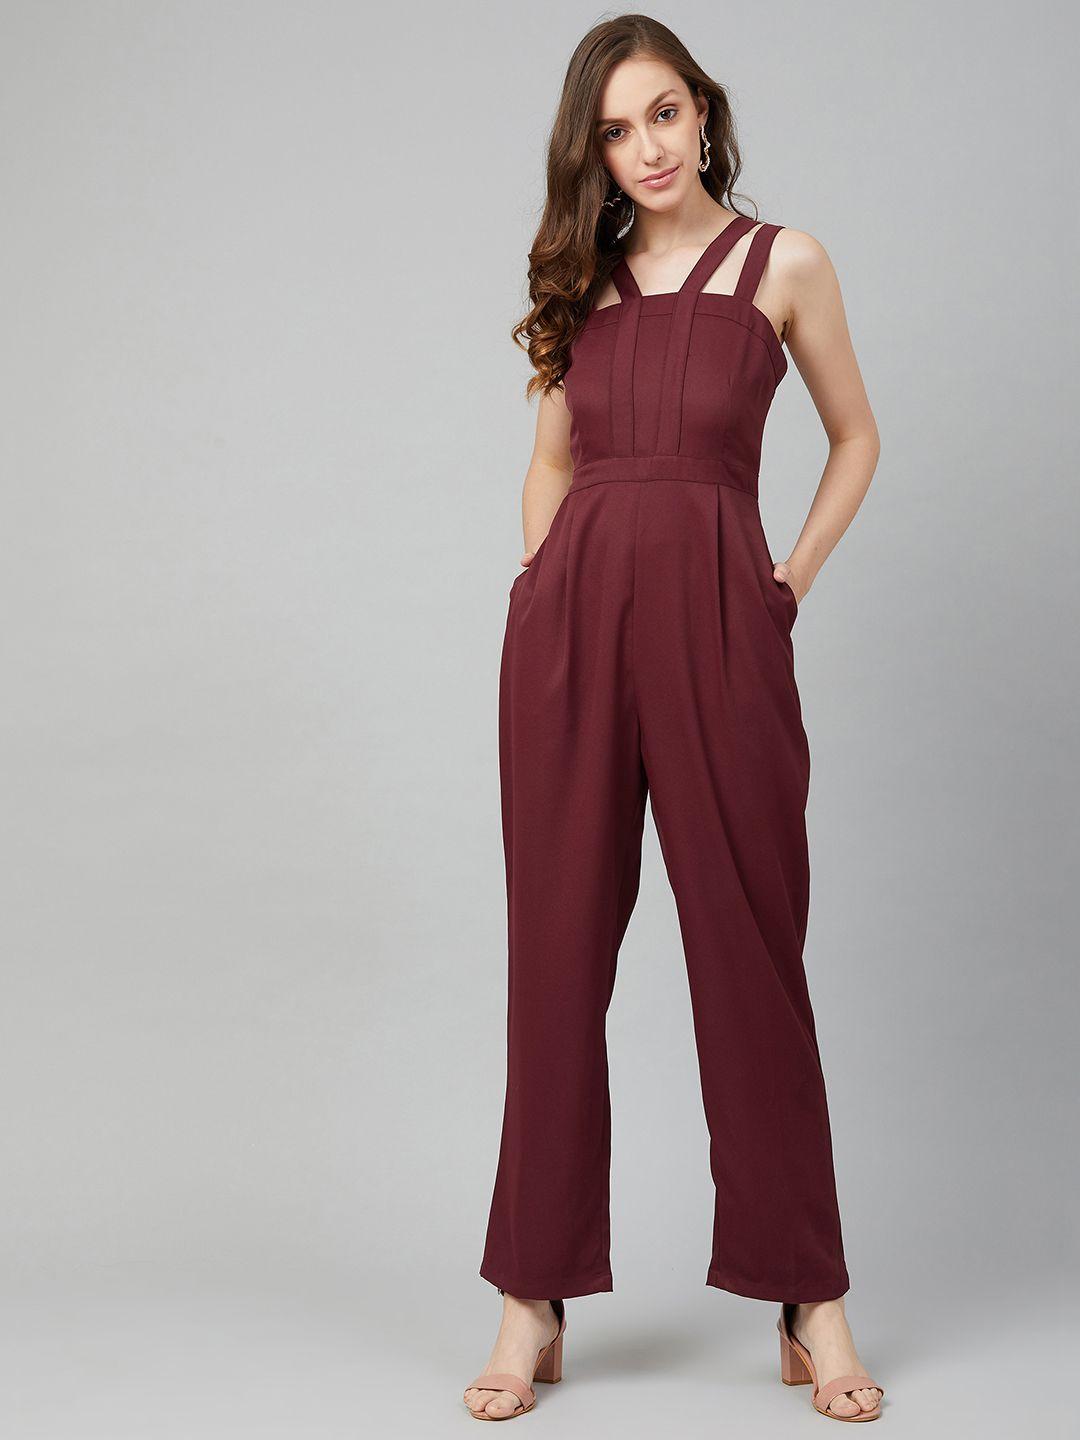 marie claire women maroon solid basic jumpsuit